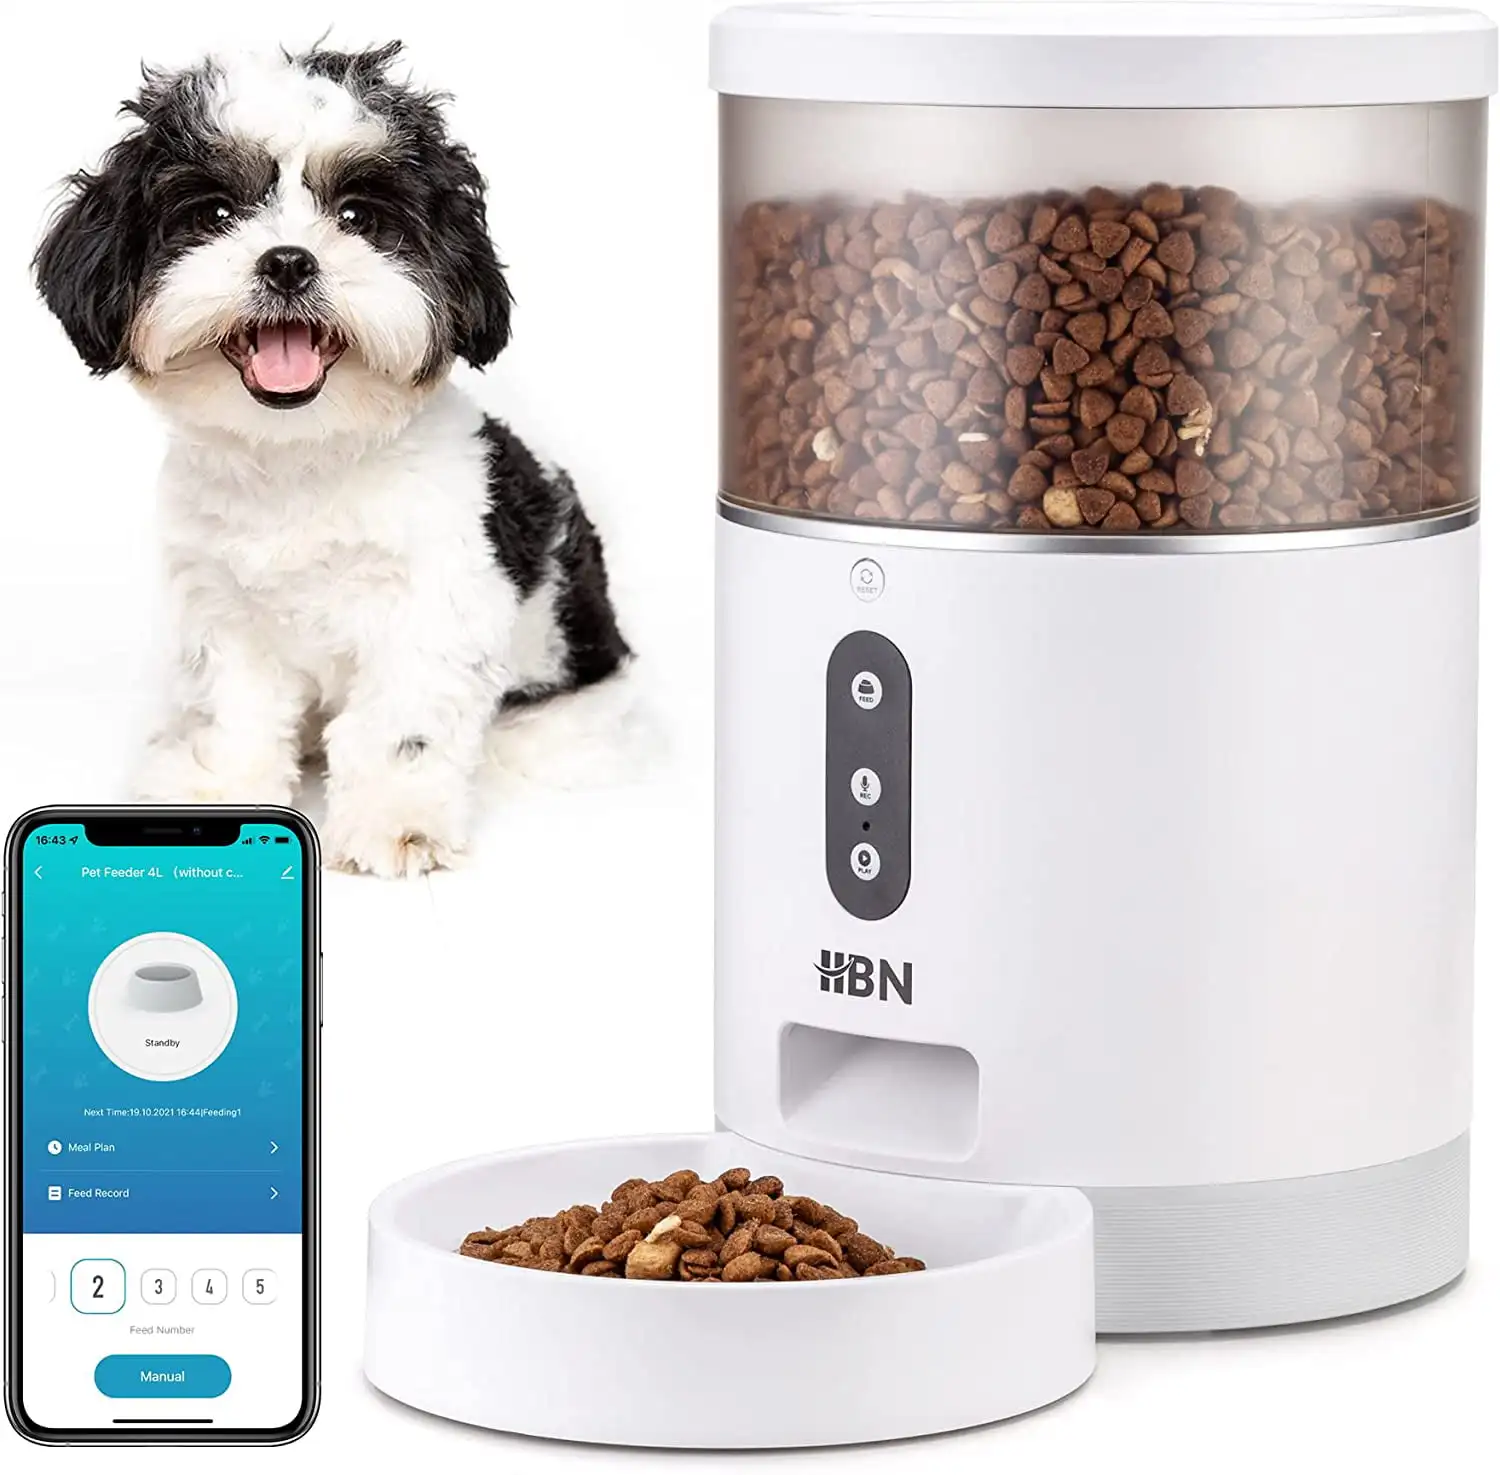 

Automatic Cat Feeder, 4L Smart Cats Dogs Feeder, Auto Pet Food Dispenser with Portion Control and Voice Recorder, 2.4G Wi-Fi Ena